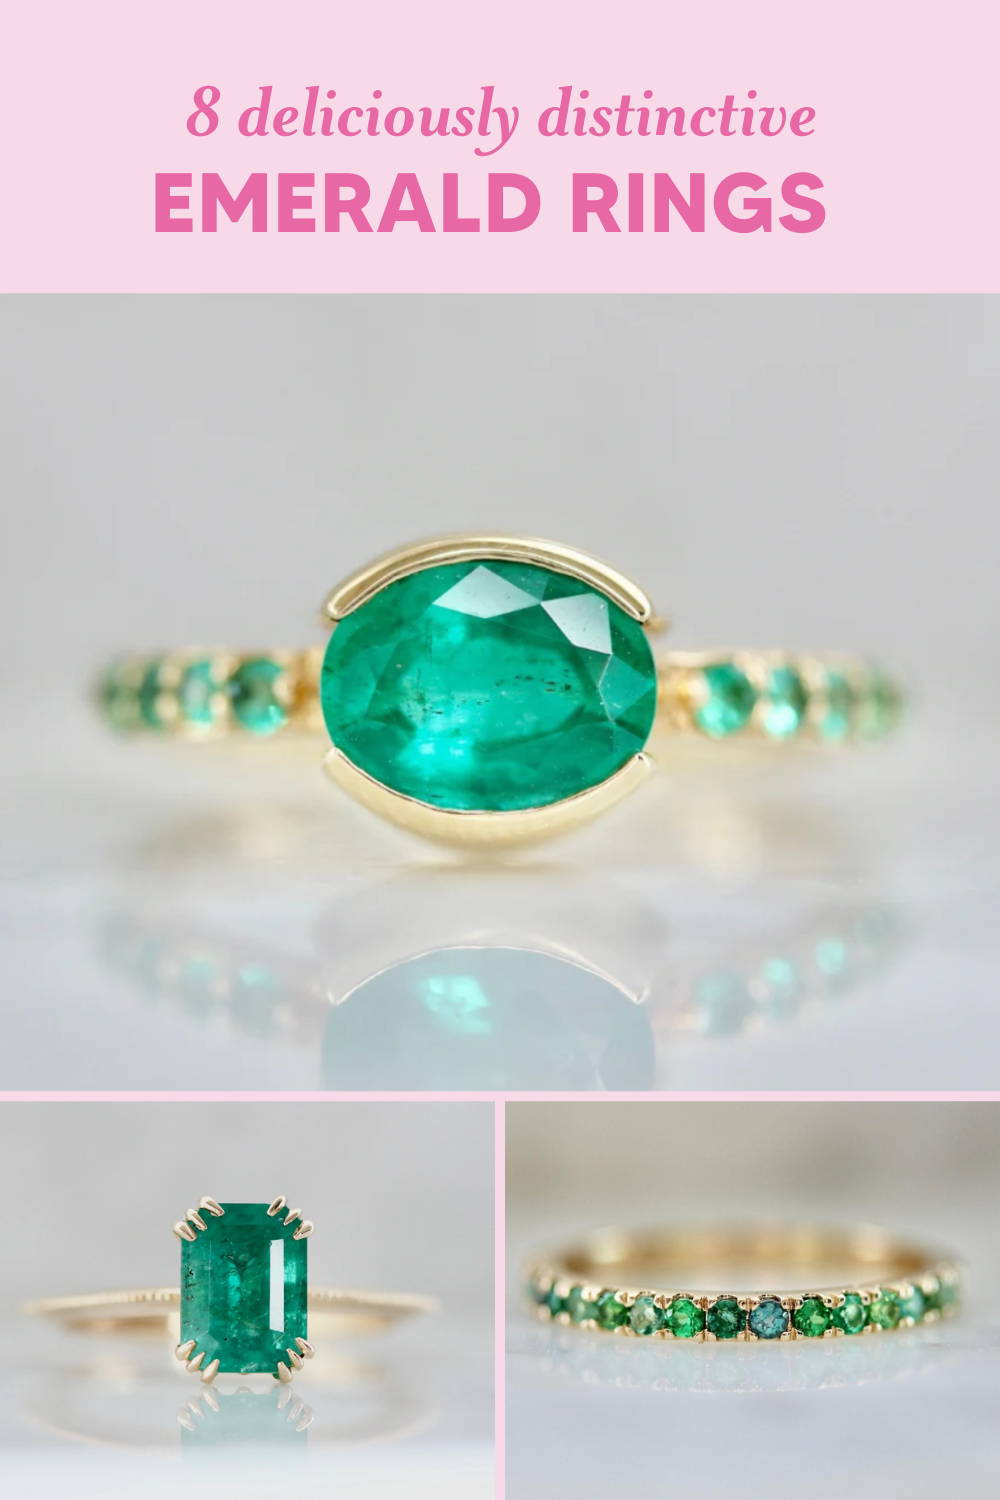 8 deliciously distinctive emerald rings and pro tips for picking your perfect emerald